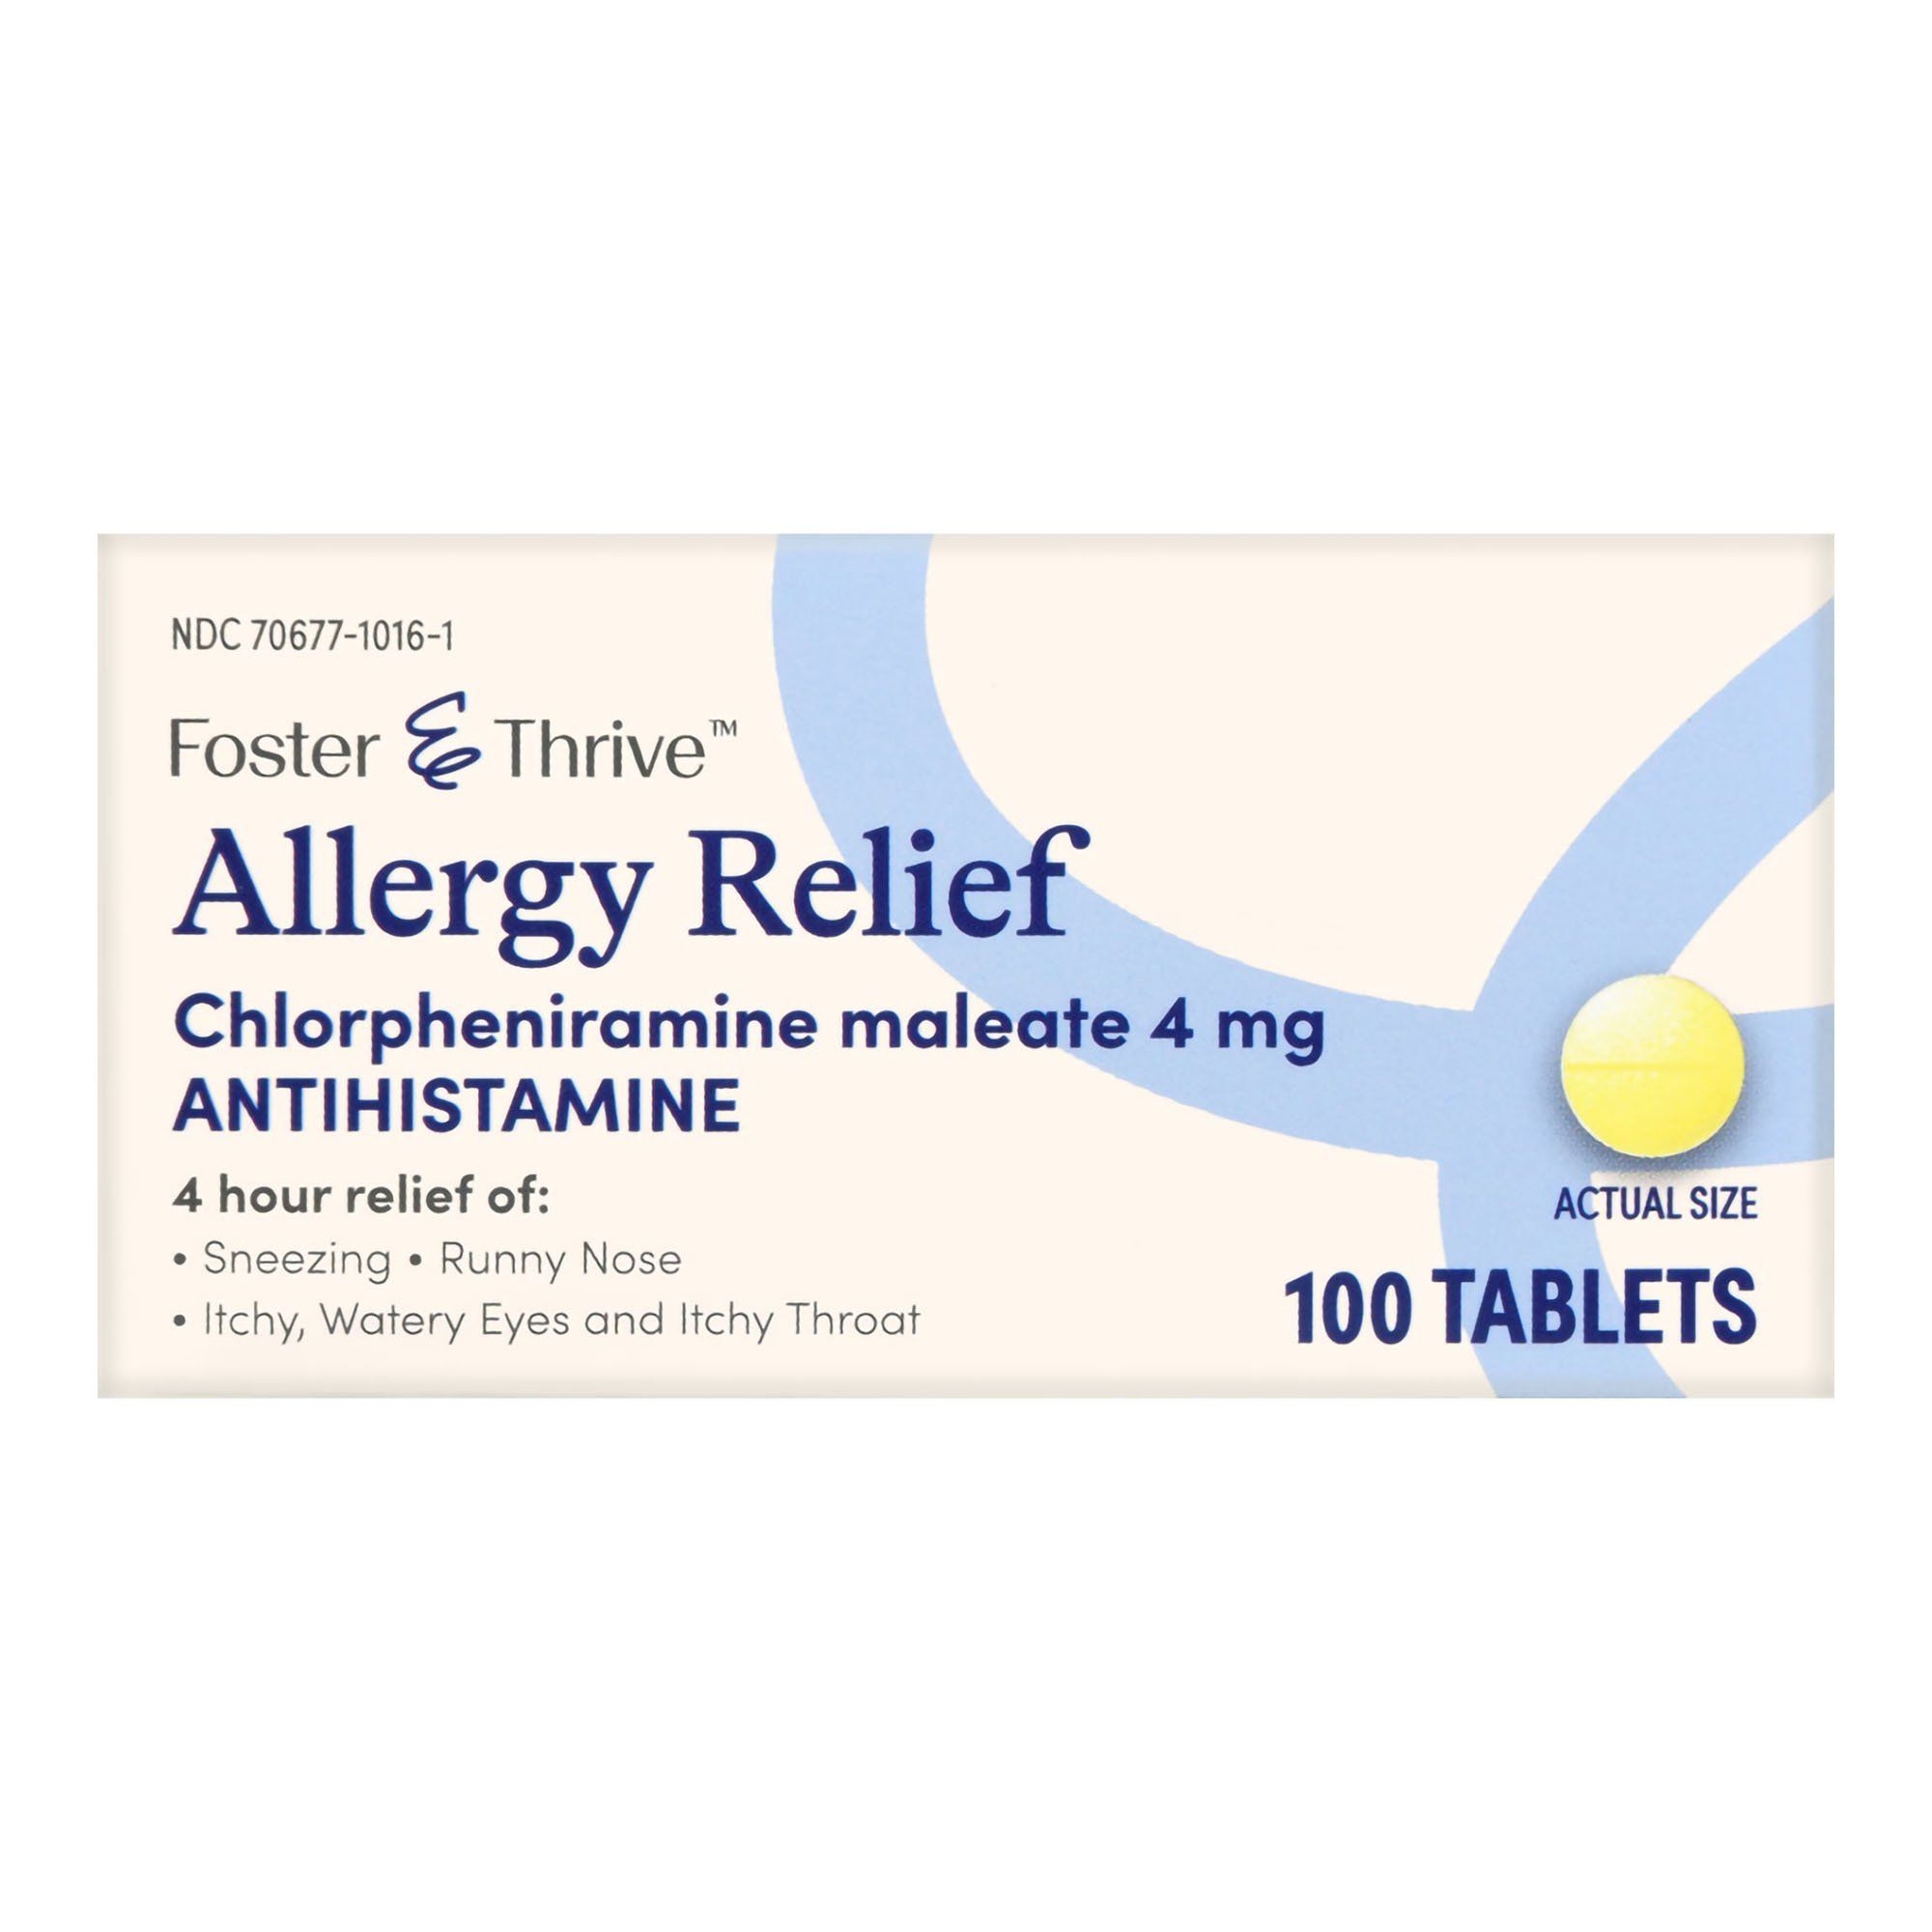 Foster & Thrive Allergy Relief Chlorpheniramine Maleate Tablets,  4 mg - 100 ct